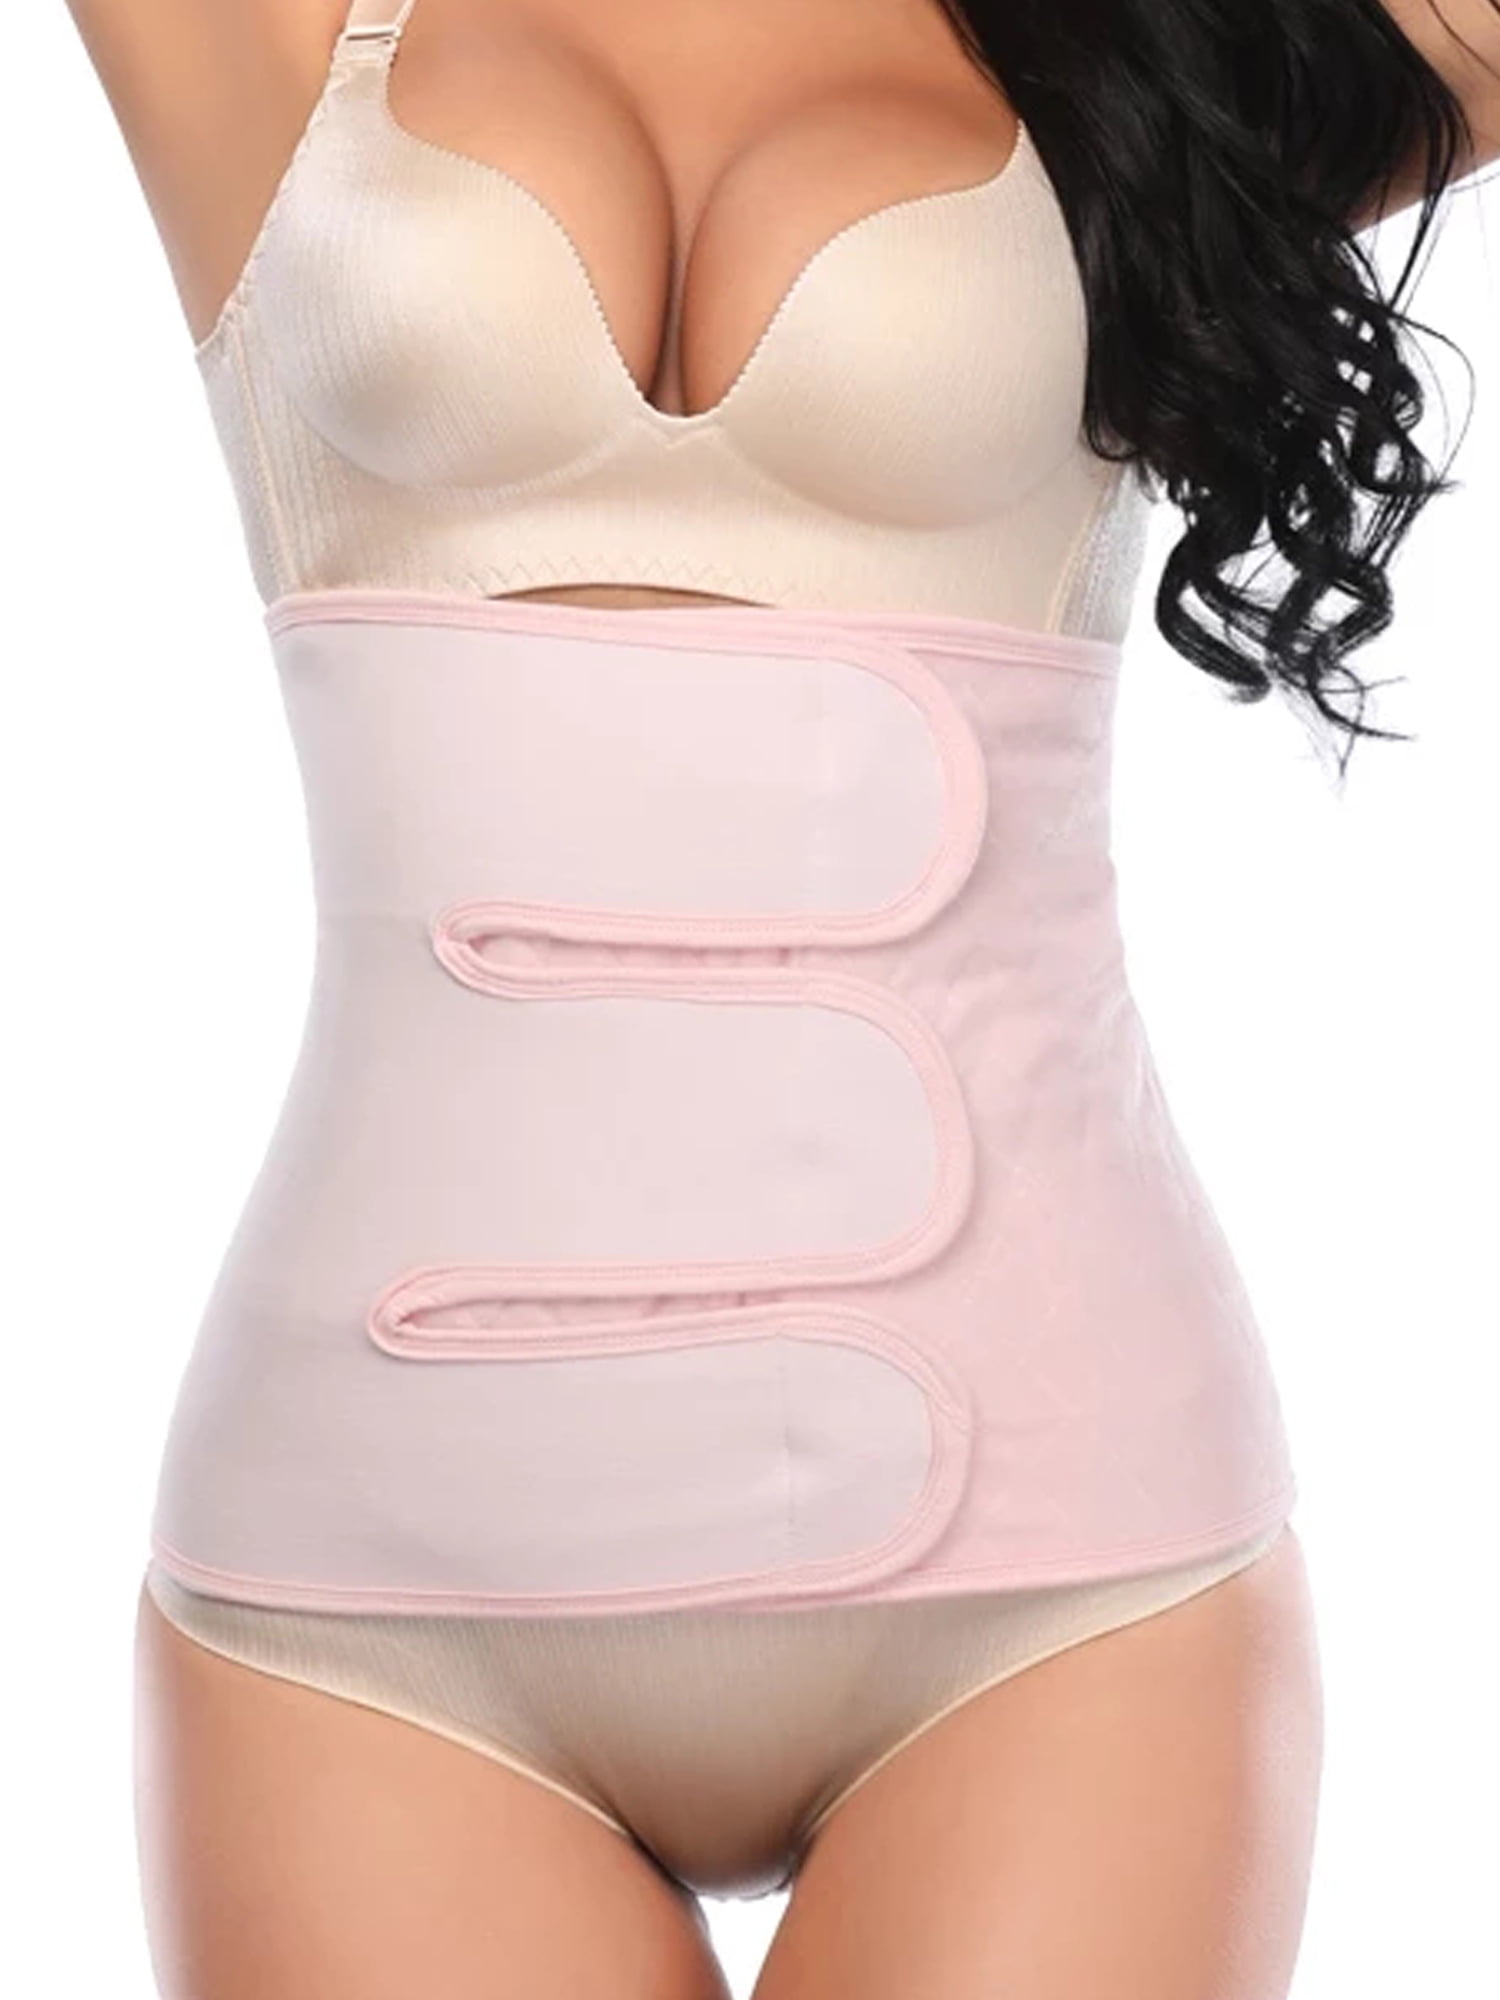 Buy Postpartum Belly Wrap C Section Recovery Belt Girdle Belly